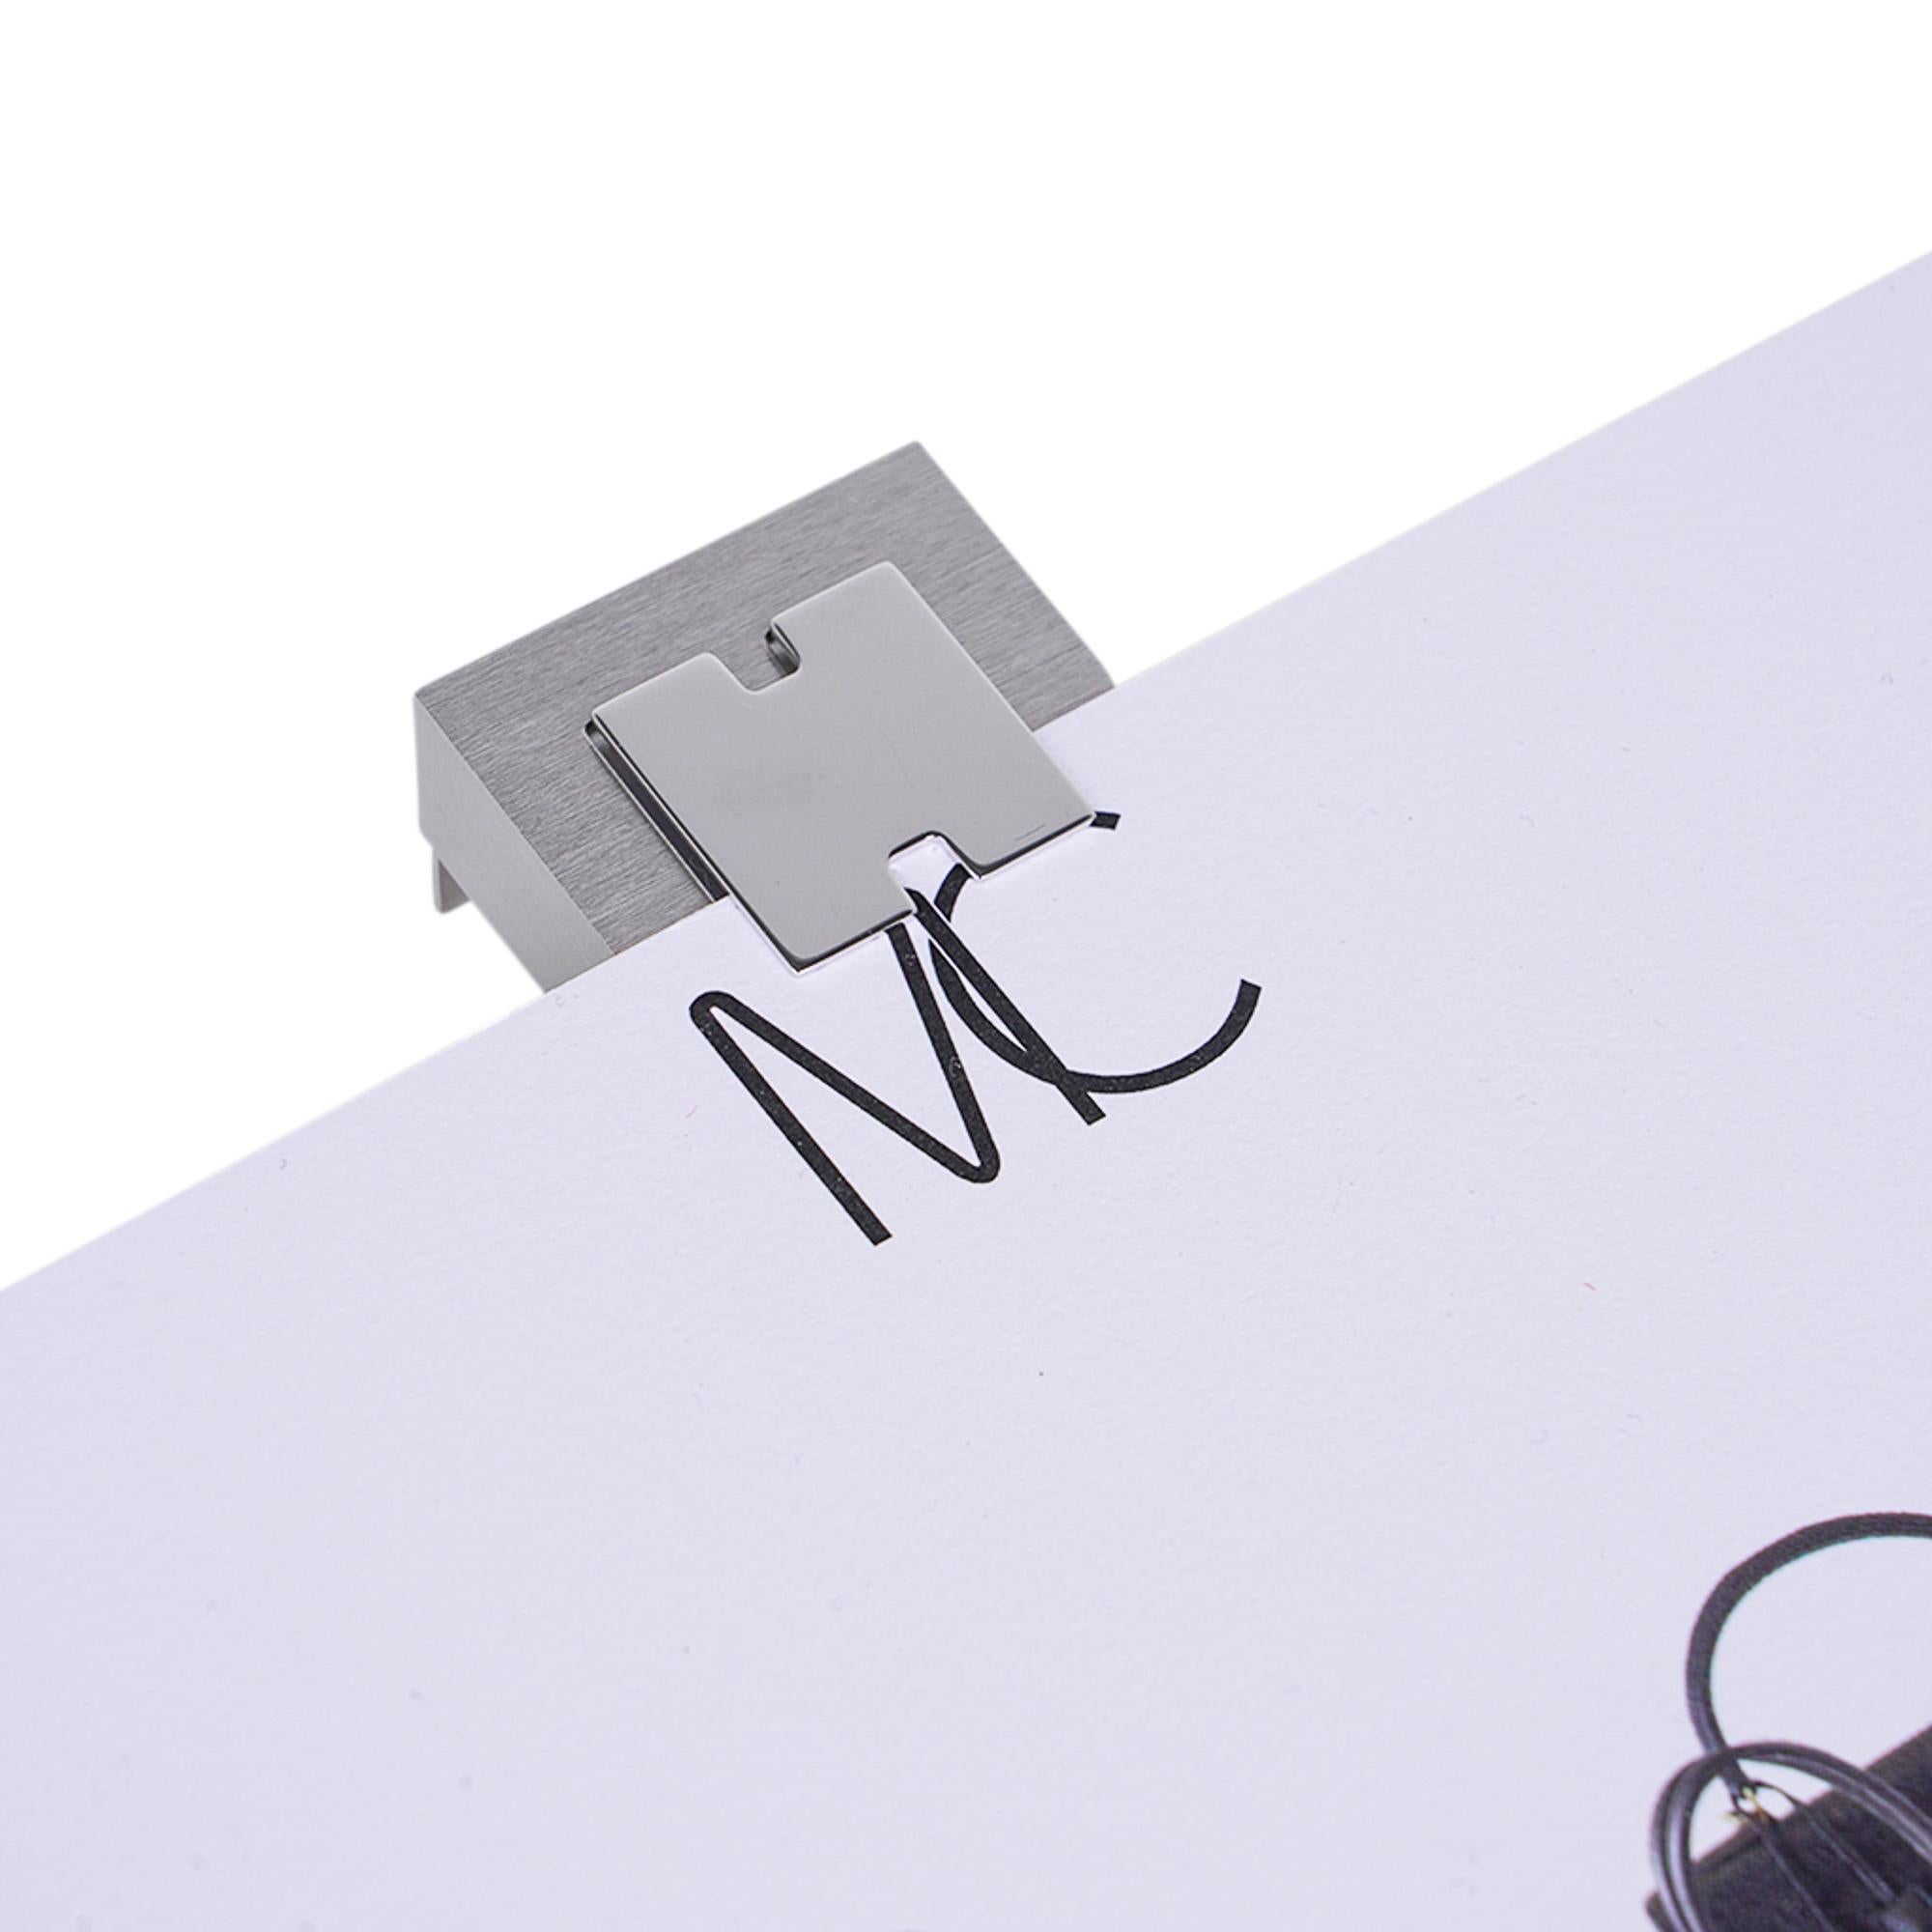 Mightychic offers a vintage Hermes the Smile Photo /Menu Holder picture holder featured in brushed steel and palladium.
Holds 1 photo just above the silver H.
A thin retractable edge allows the Smile Photo Holder to stand.
Stamped Hermes.
New or